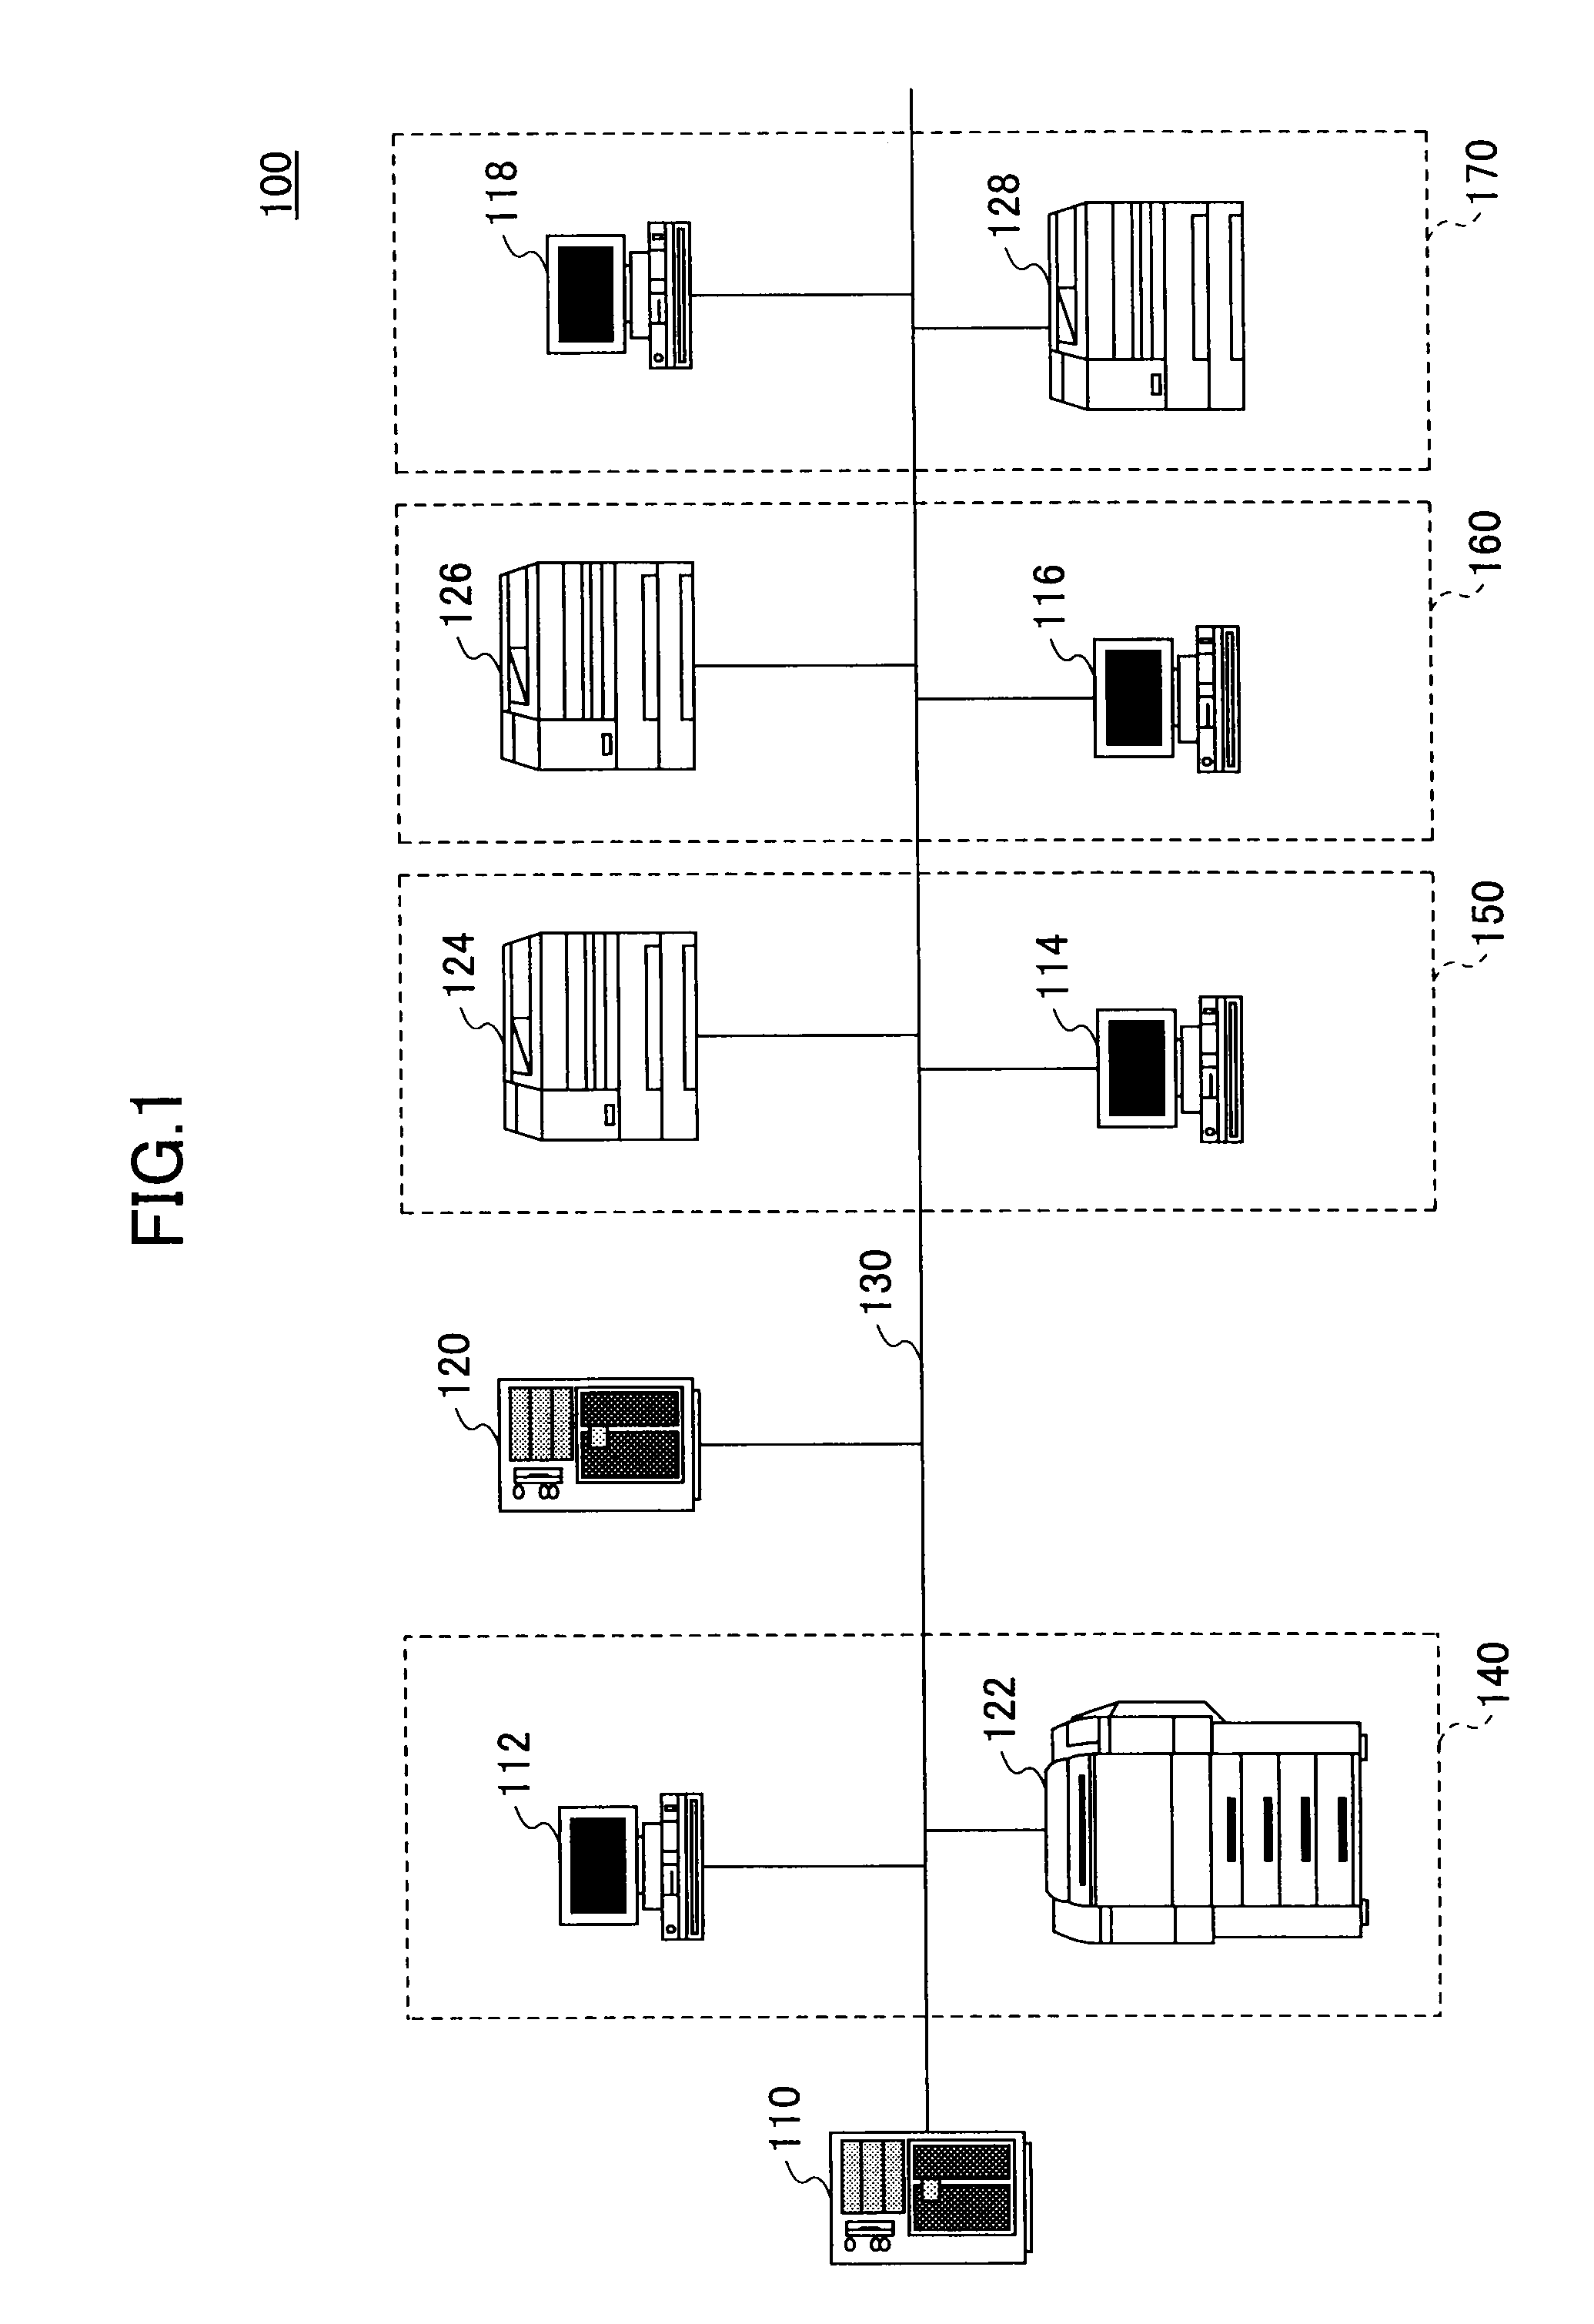 Data processing apparatus, printer network system, data processing method, and computer-readable recording medium thereof